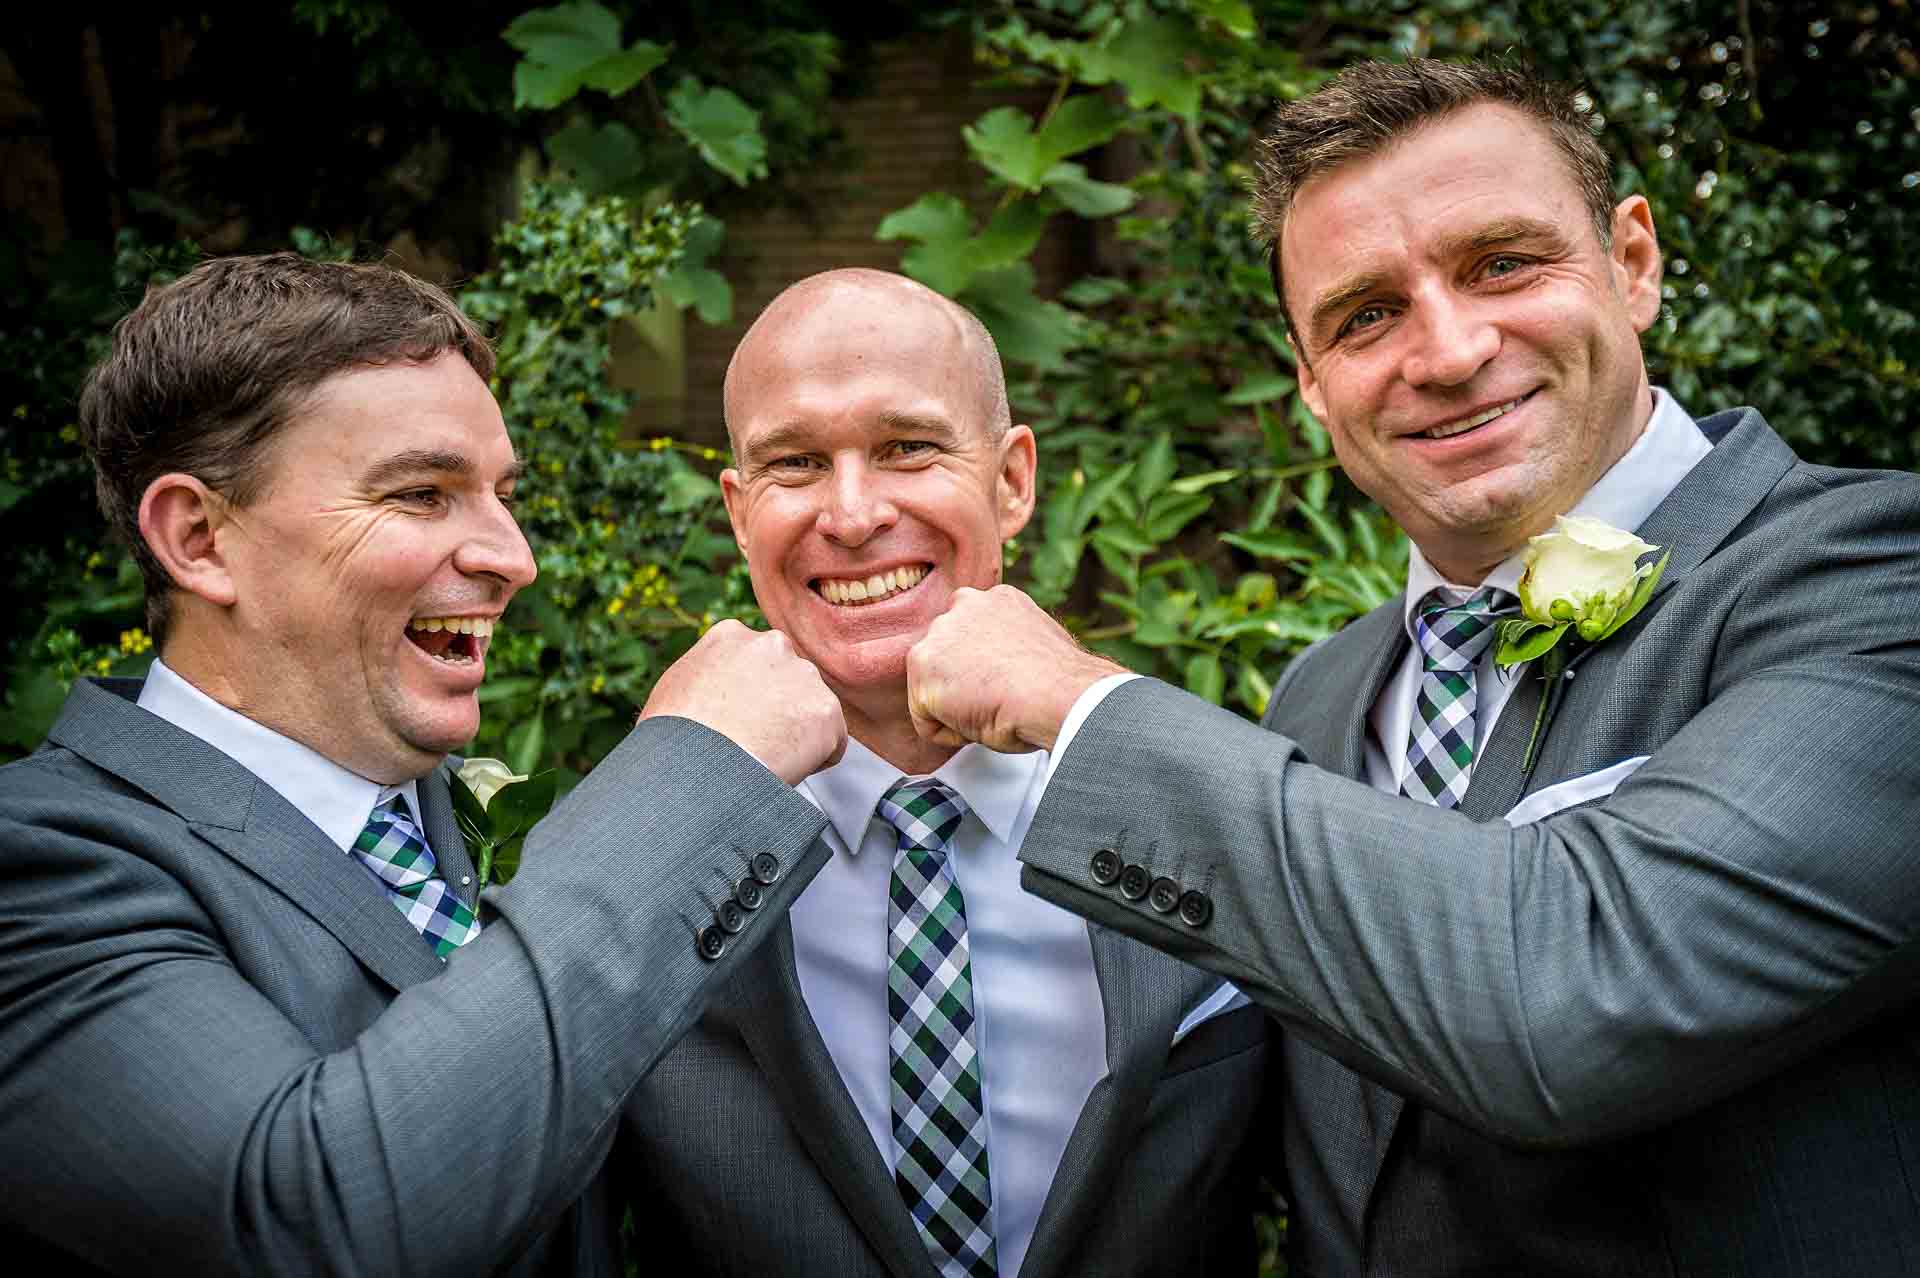 Fun Wedding Portrait of Groom with Friends Pretending to Punch him on the Chin